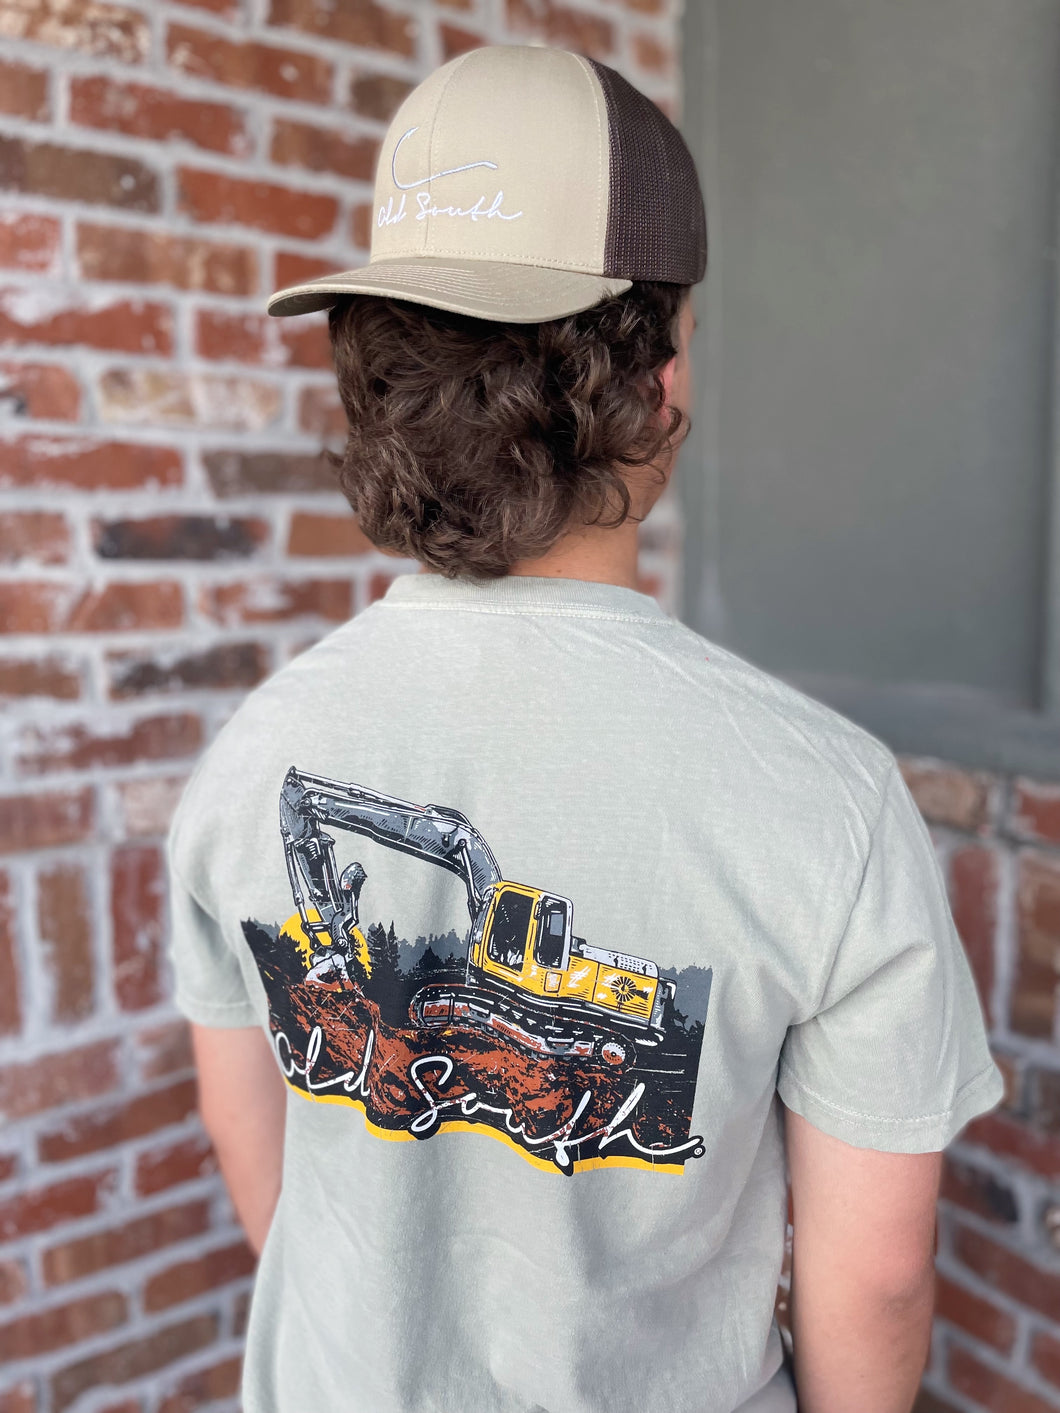 Old South Trackhoe T-Shirt